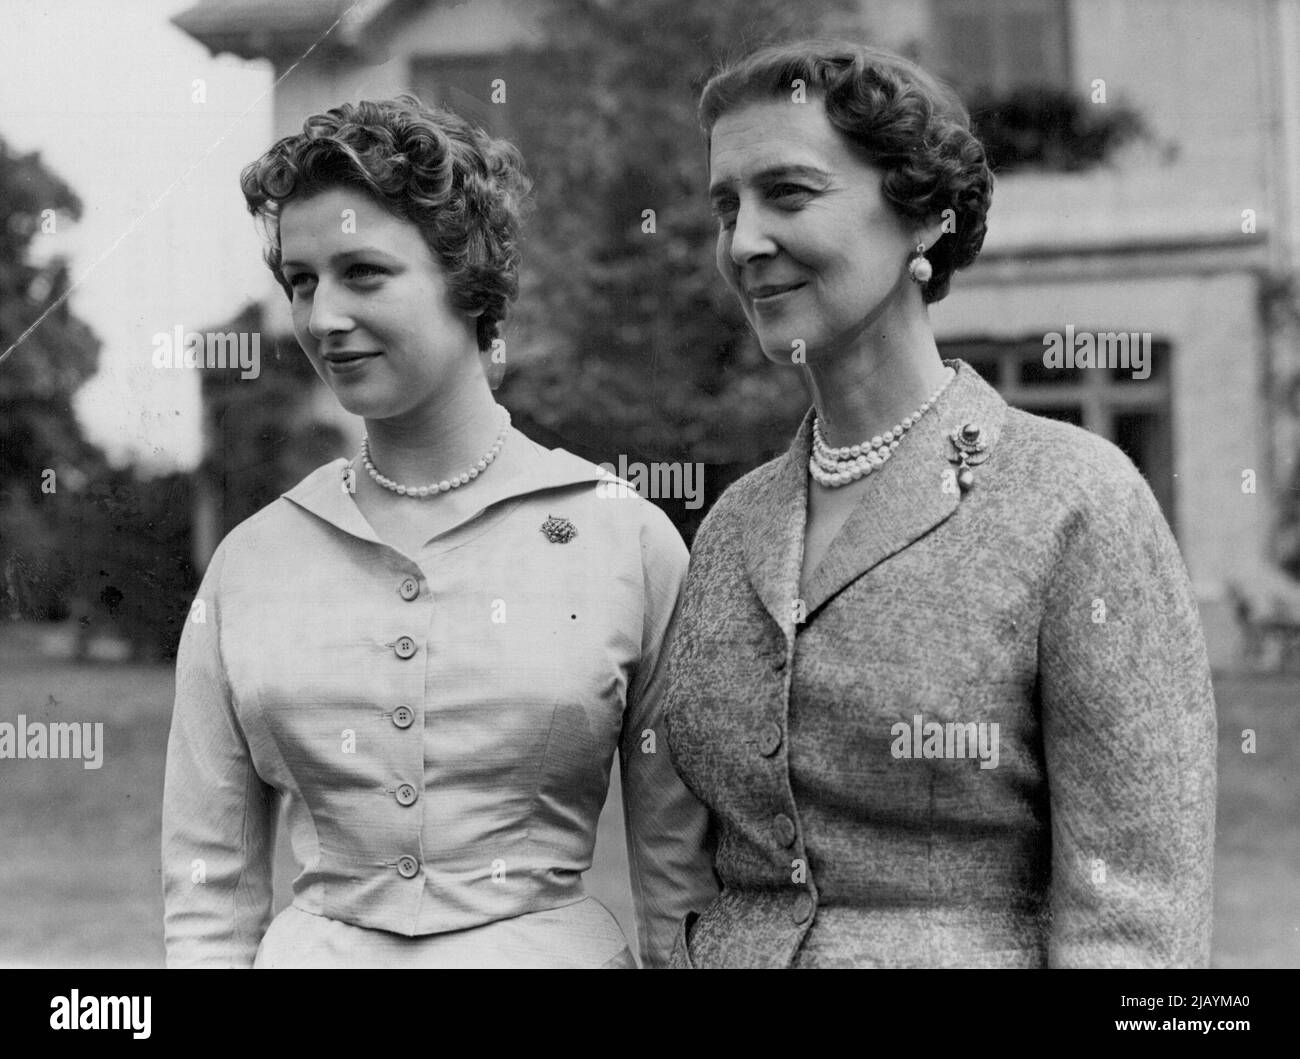 At Home to Photographers -- Princess Alexandra with her mother, The Duchess of Kent, in the grounds of the Buckinghamshire home today. Princess Alexandra, 17, daughter of The Duchess of Kent, was officially 'At Home' to photographers today. With her mother, the princess posed for a number of cameramen in the grounds of the coppins, in Iver, Buckinghamshire. The Princess made her debut in public life this summer and has carried out a number of social and official engagements, alone, of with her mother. July 09, 1954. (Photo by Paul Popper, Paul Popper Ltd.) Stock Photo